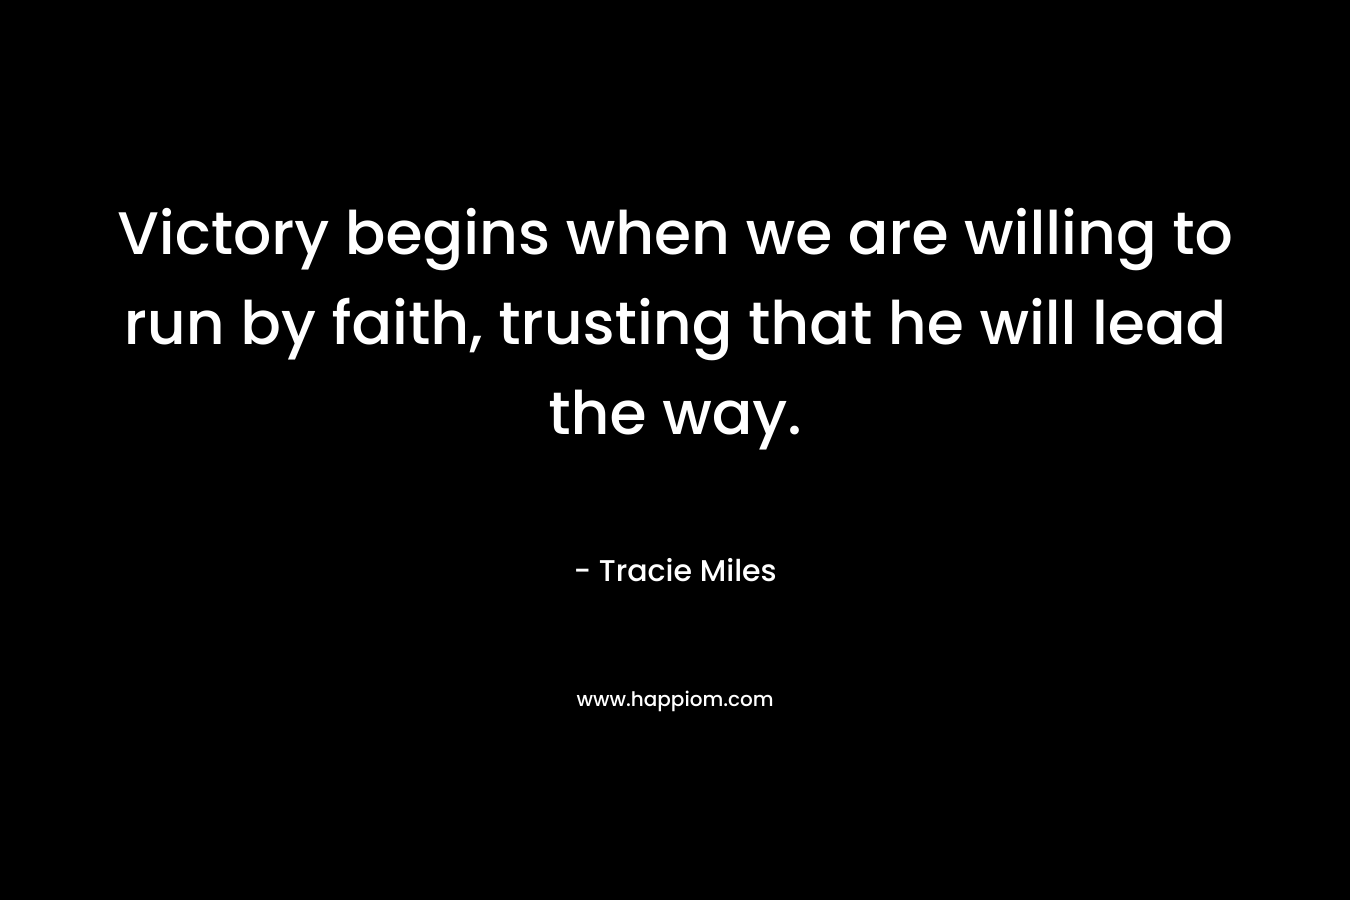 Victory begins when we are willing to run by faith, trusting that he will lead the way. – Tracie Miles